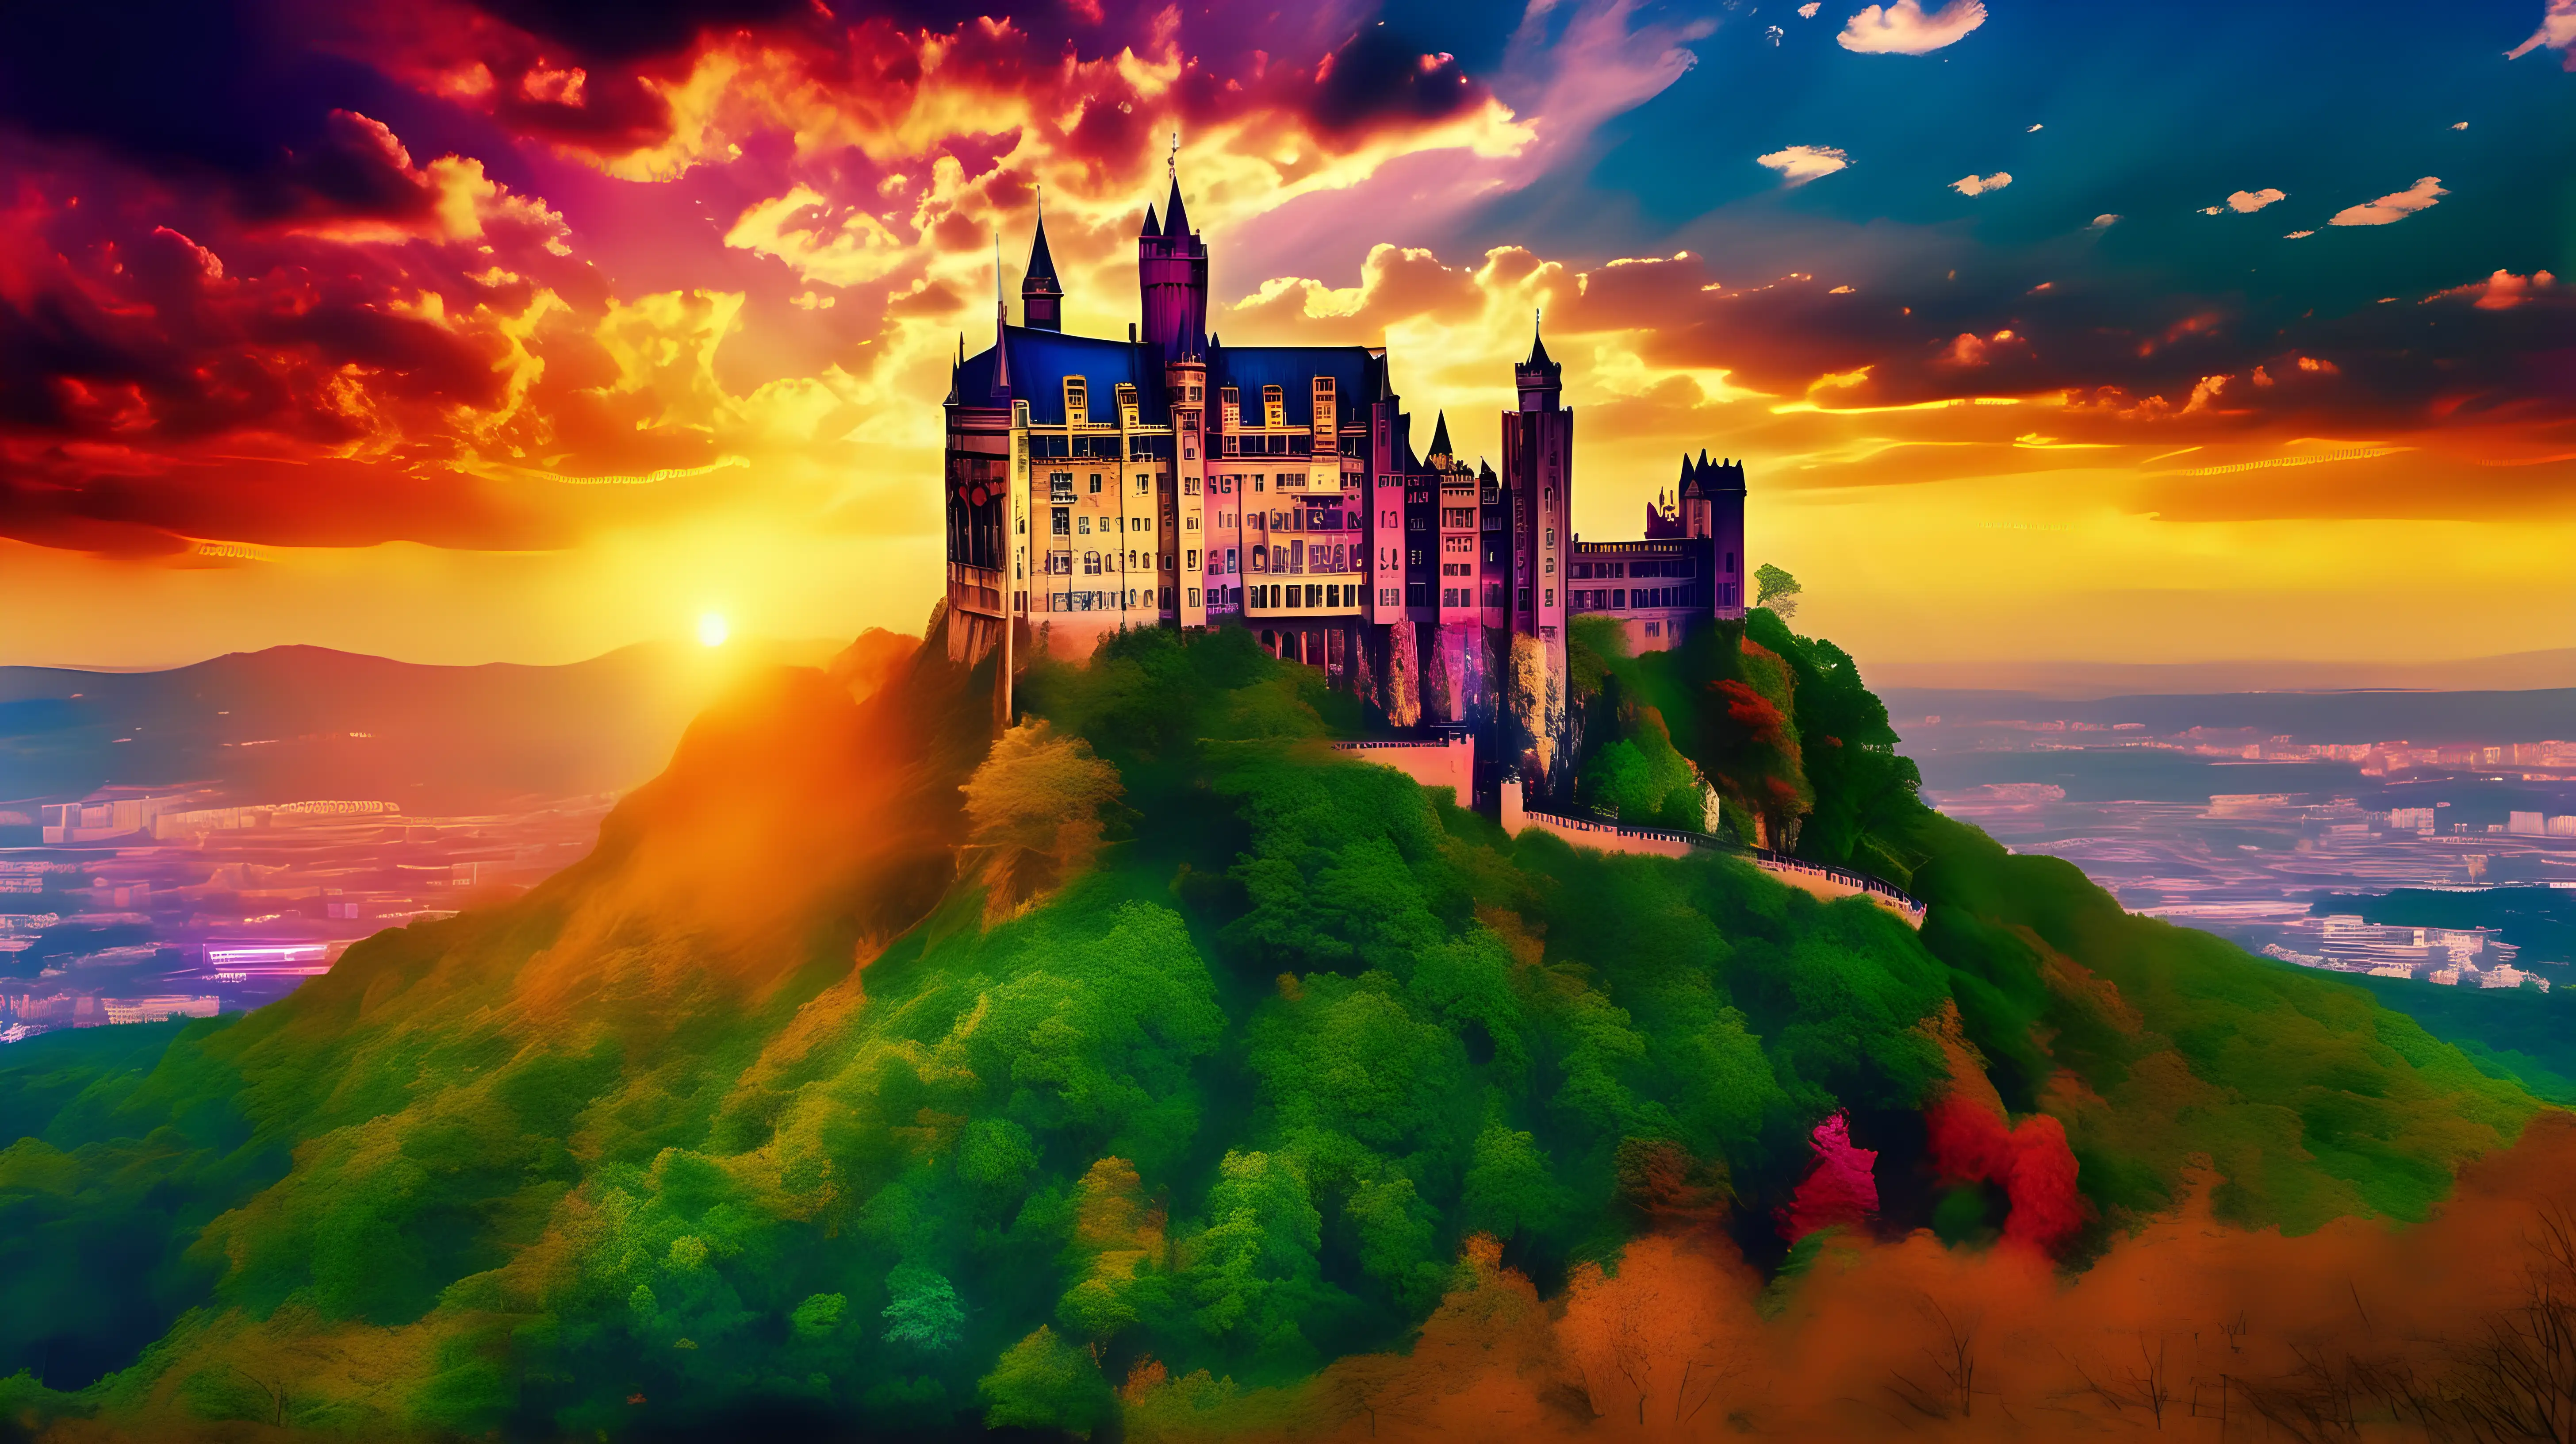 Enchanting Sunset Castle on a Hill with Lush Greenery